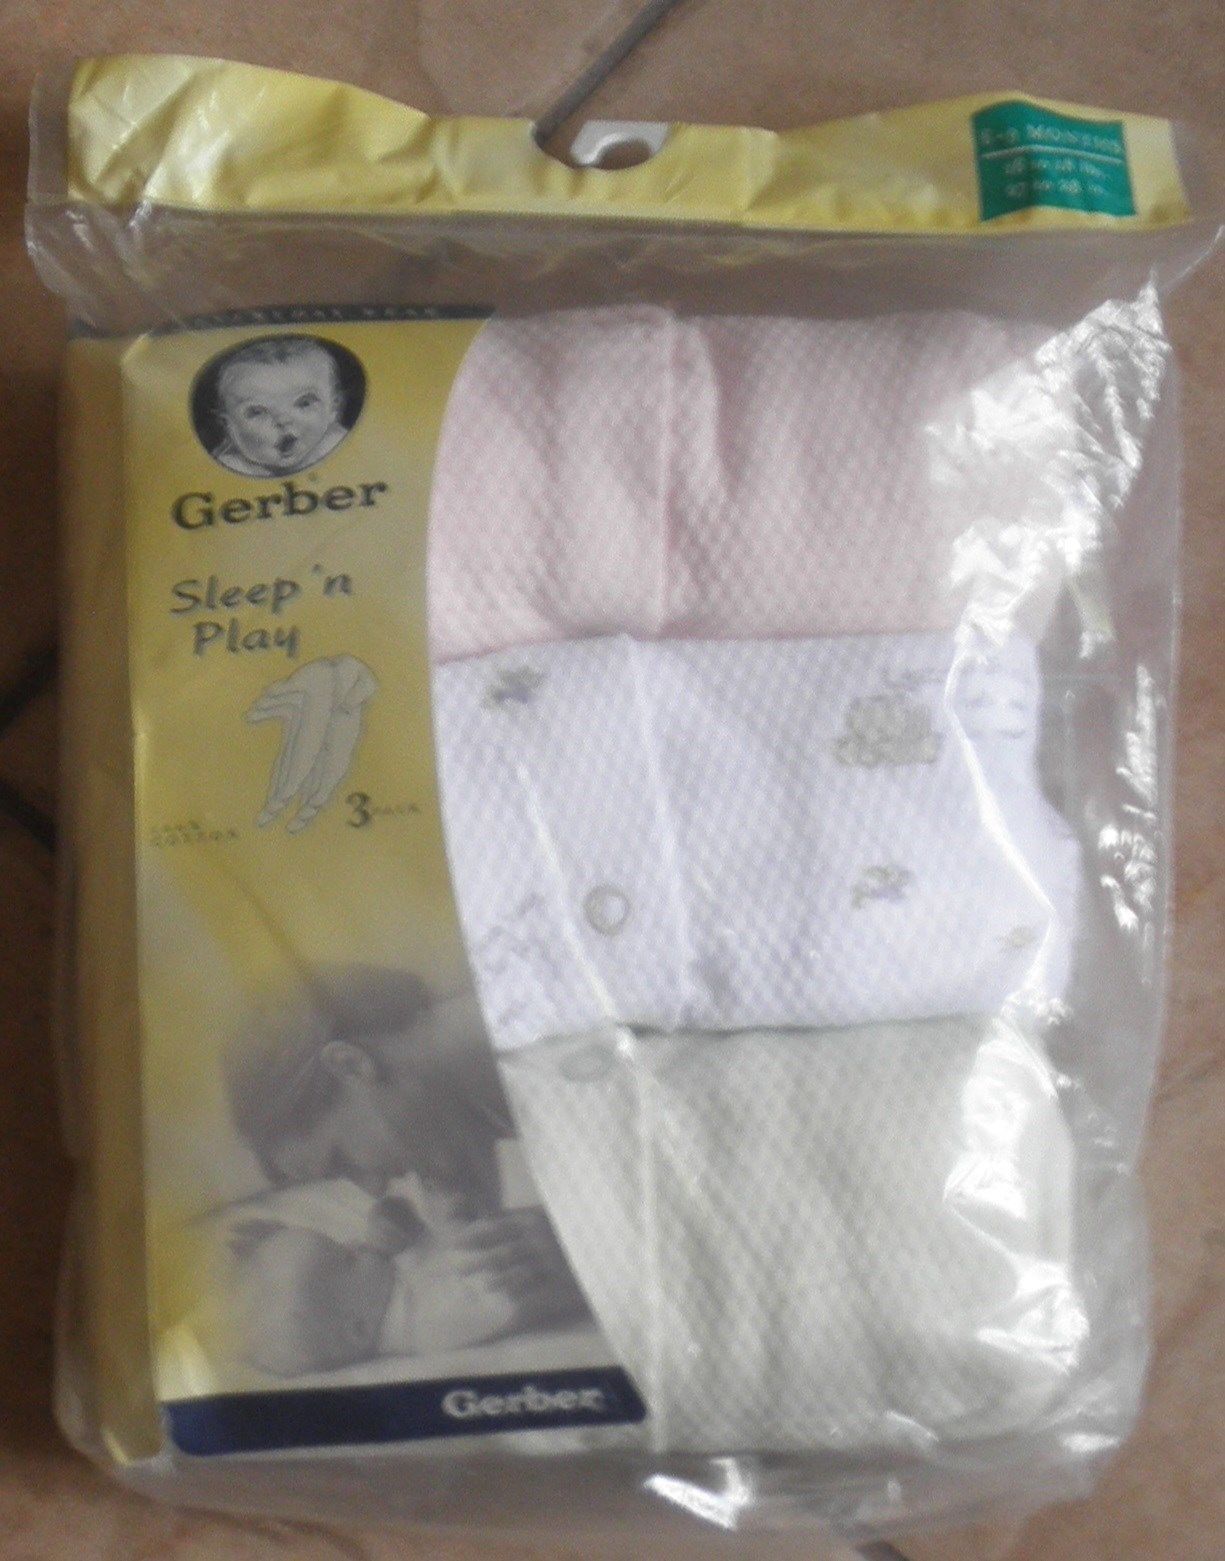 sleep and play outfit baby 3 by gerber 6 to 9 months new in sealed package - $13.12